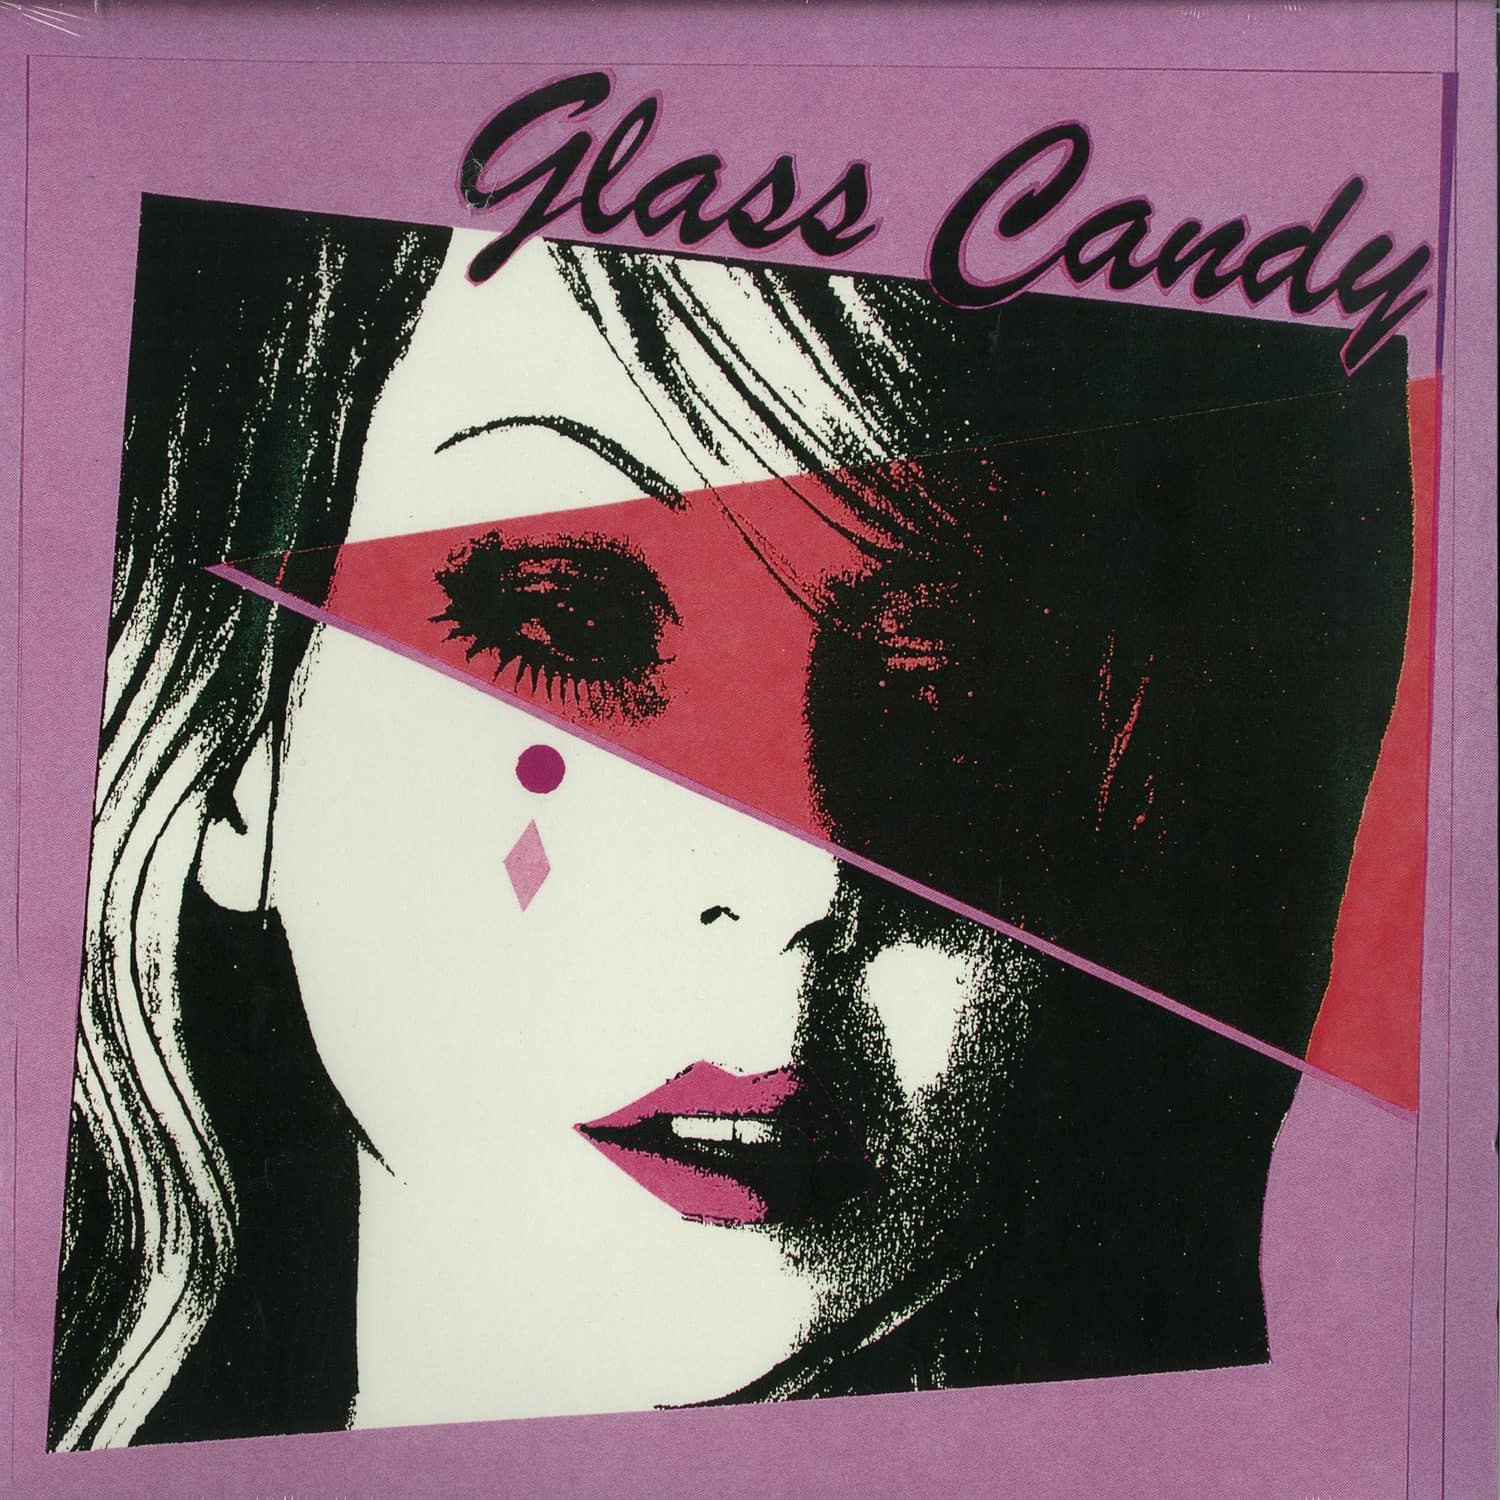 Glass Candy - I ALWAYS SAY YES 